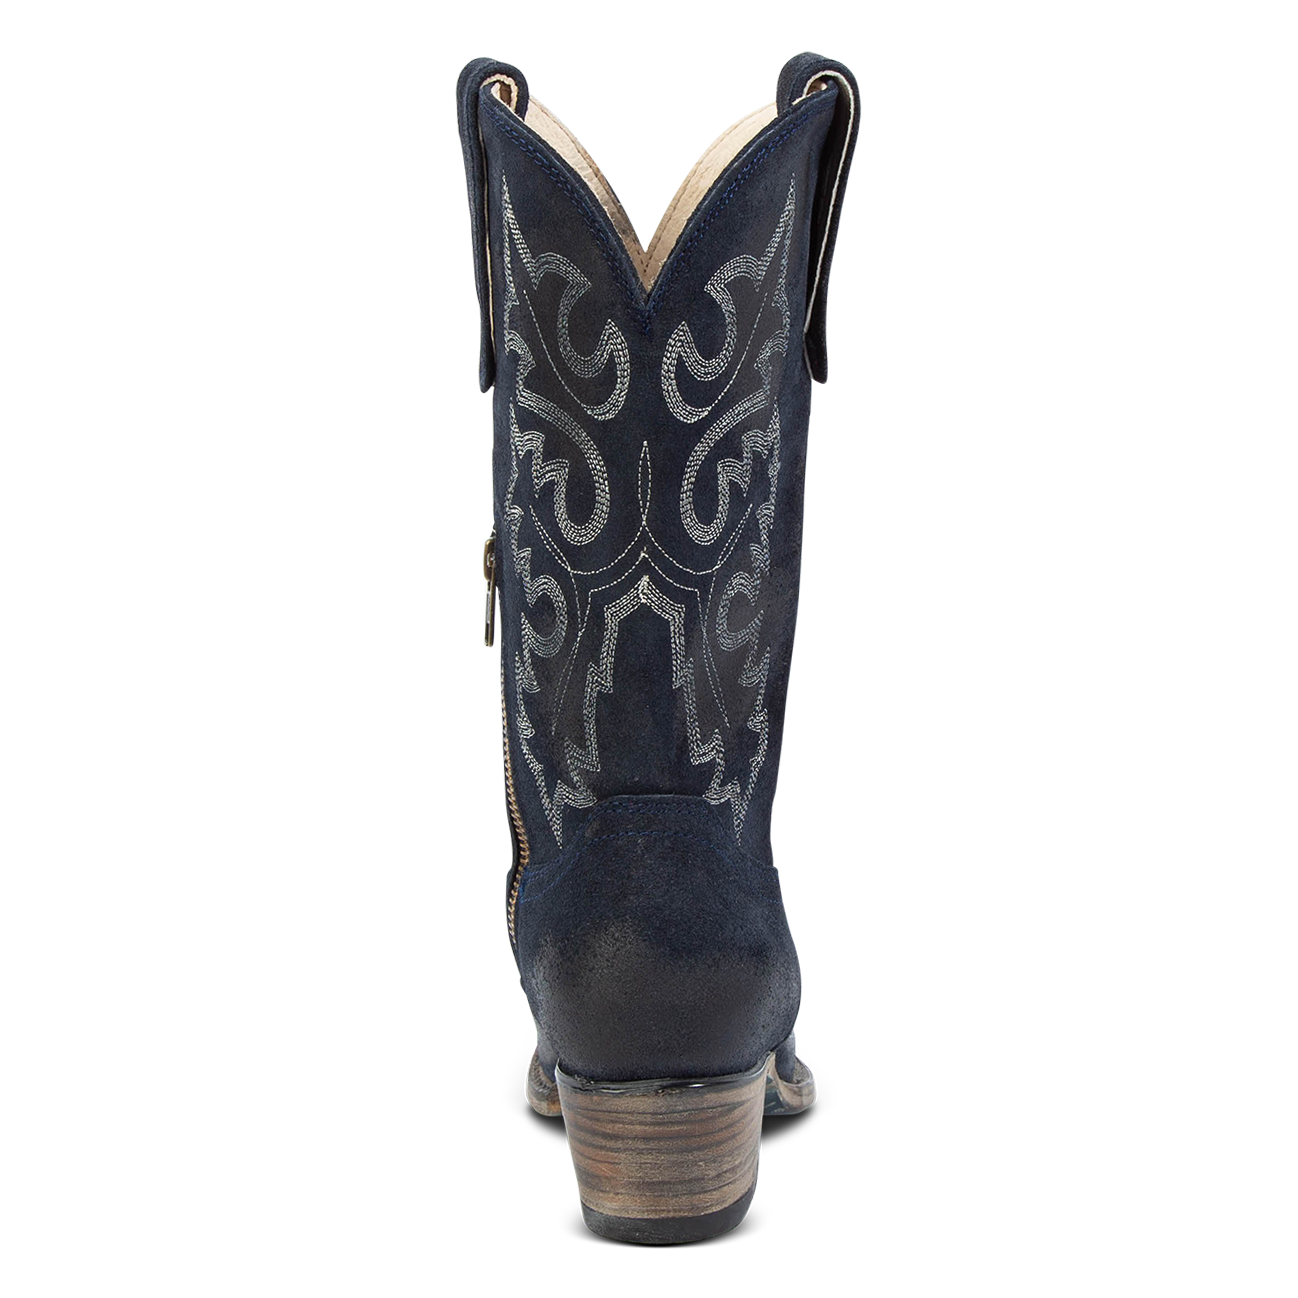 Back view showing intricate stitching and low heel on FREEBIRD women's Wilson navy suede western boot